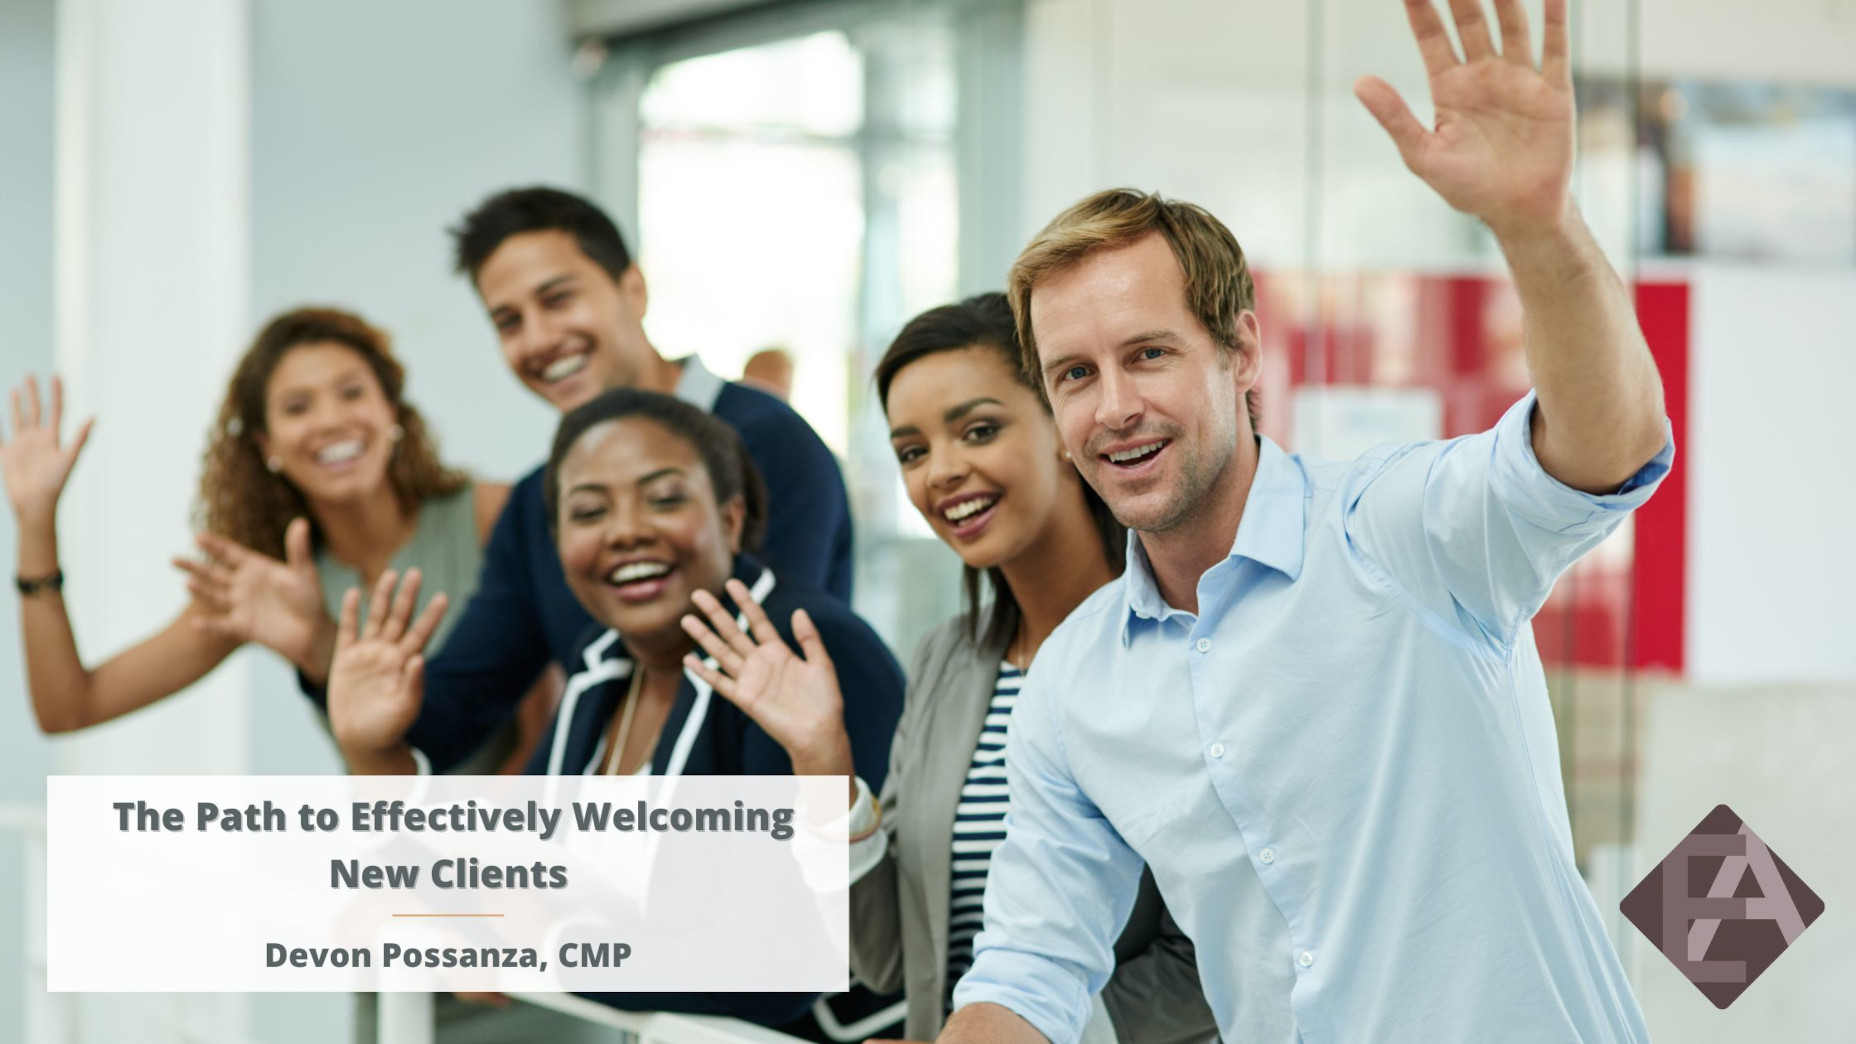 The Path to Effectively Welcoming New Clients